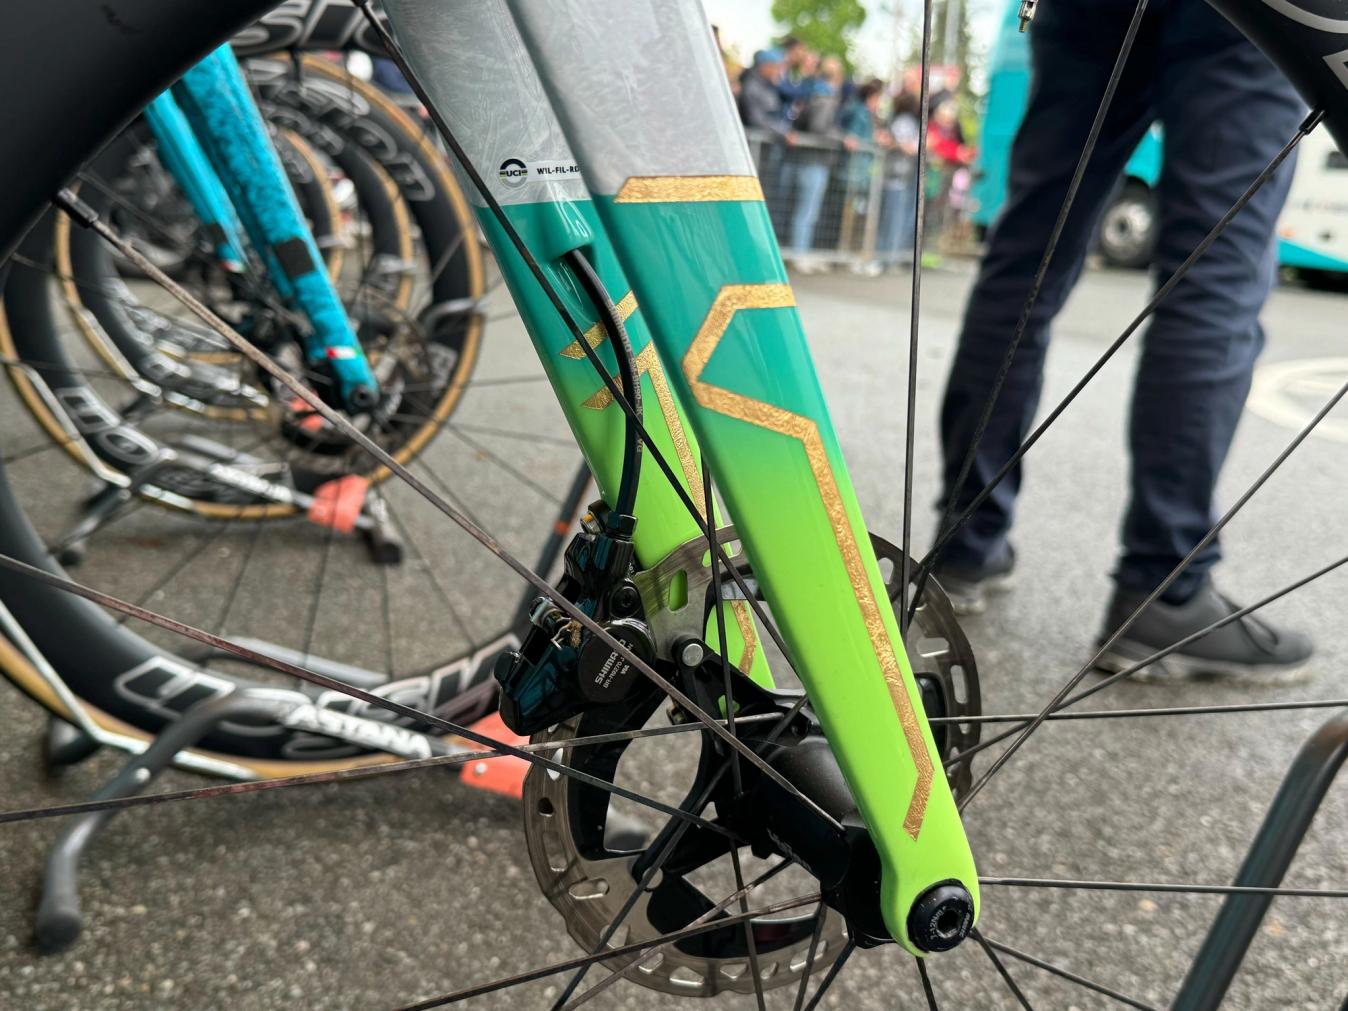 The fork and rear triangle of the bike features a blue to green fade interwoven with a gold geometric pattern